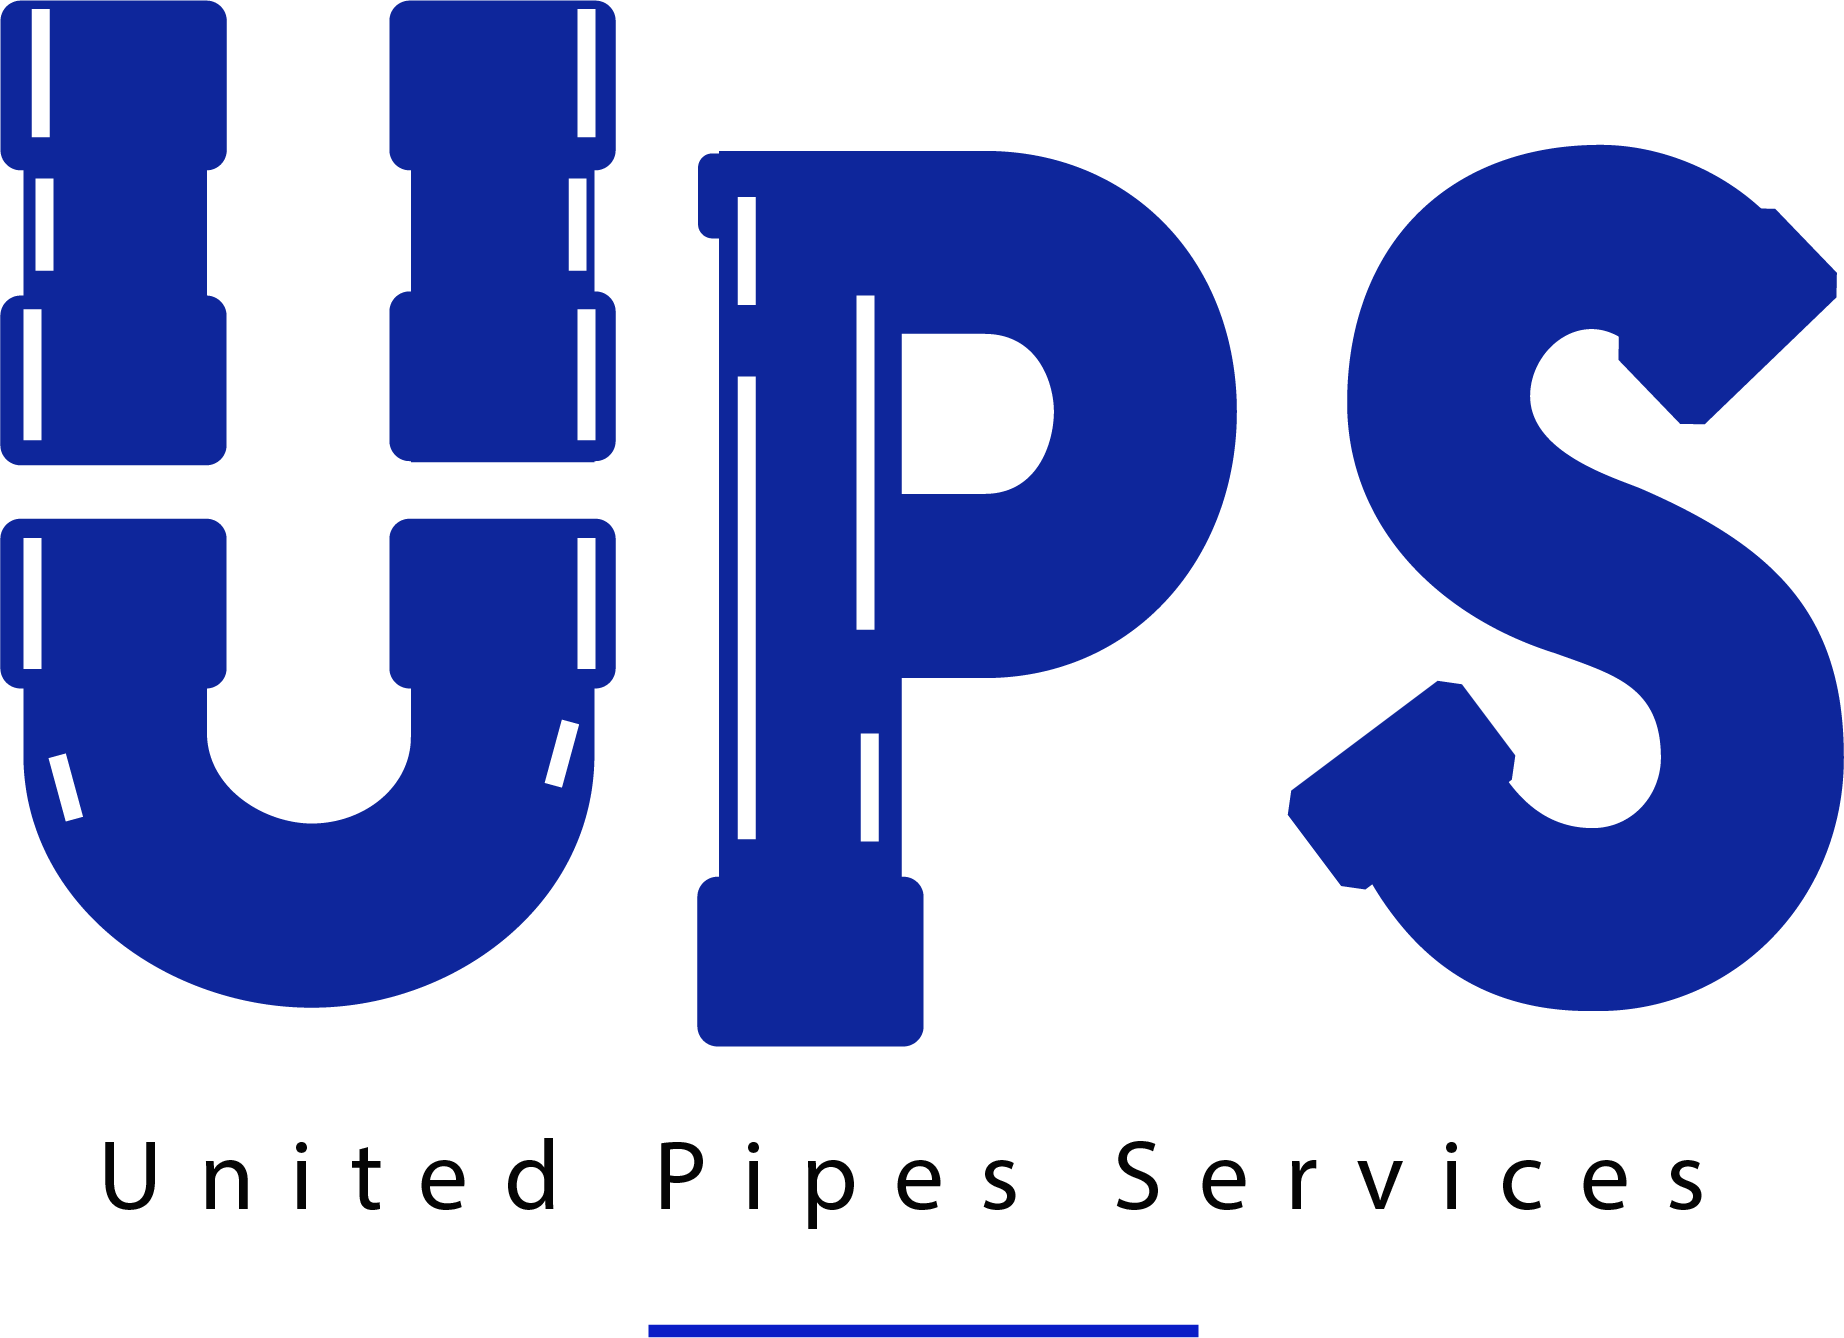 UPS UNITED PIPES SERVICES